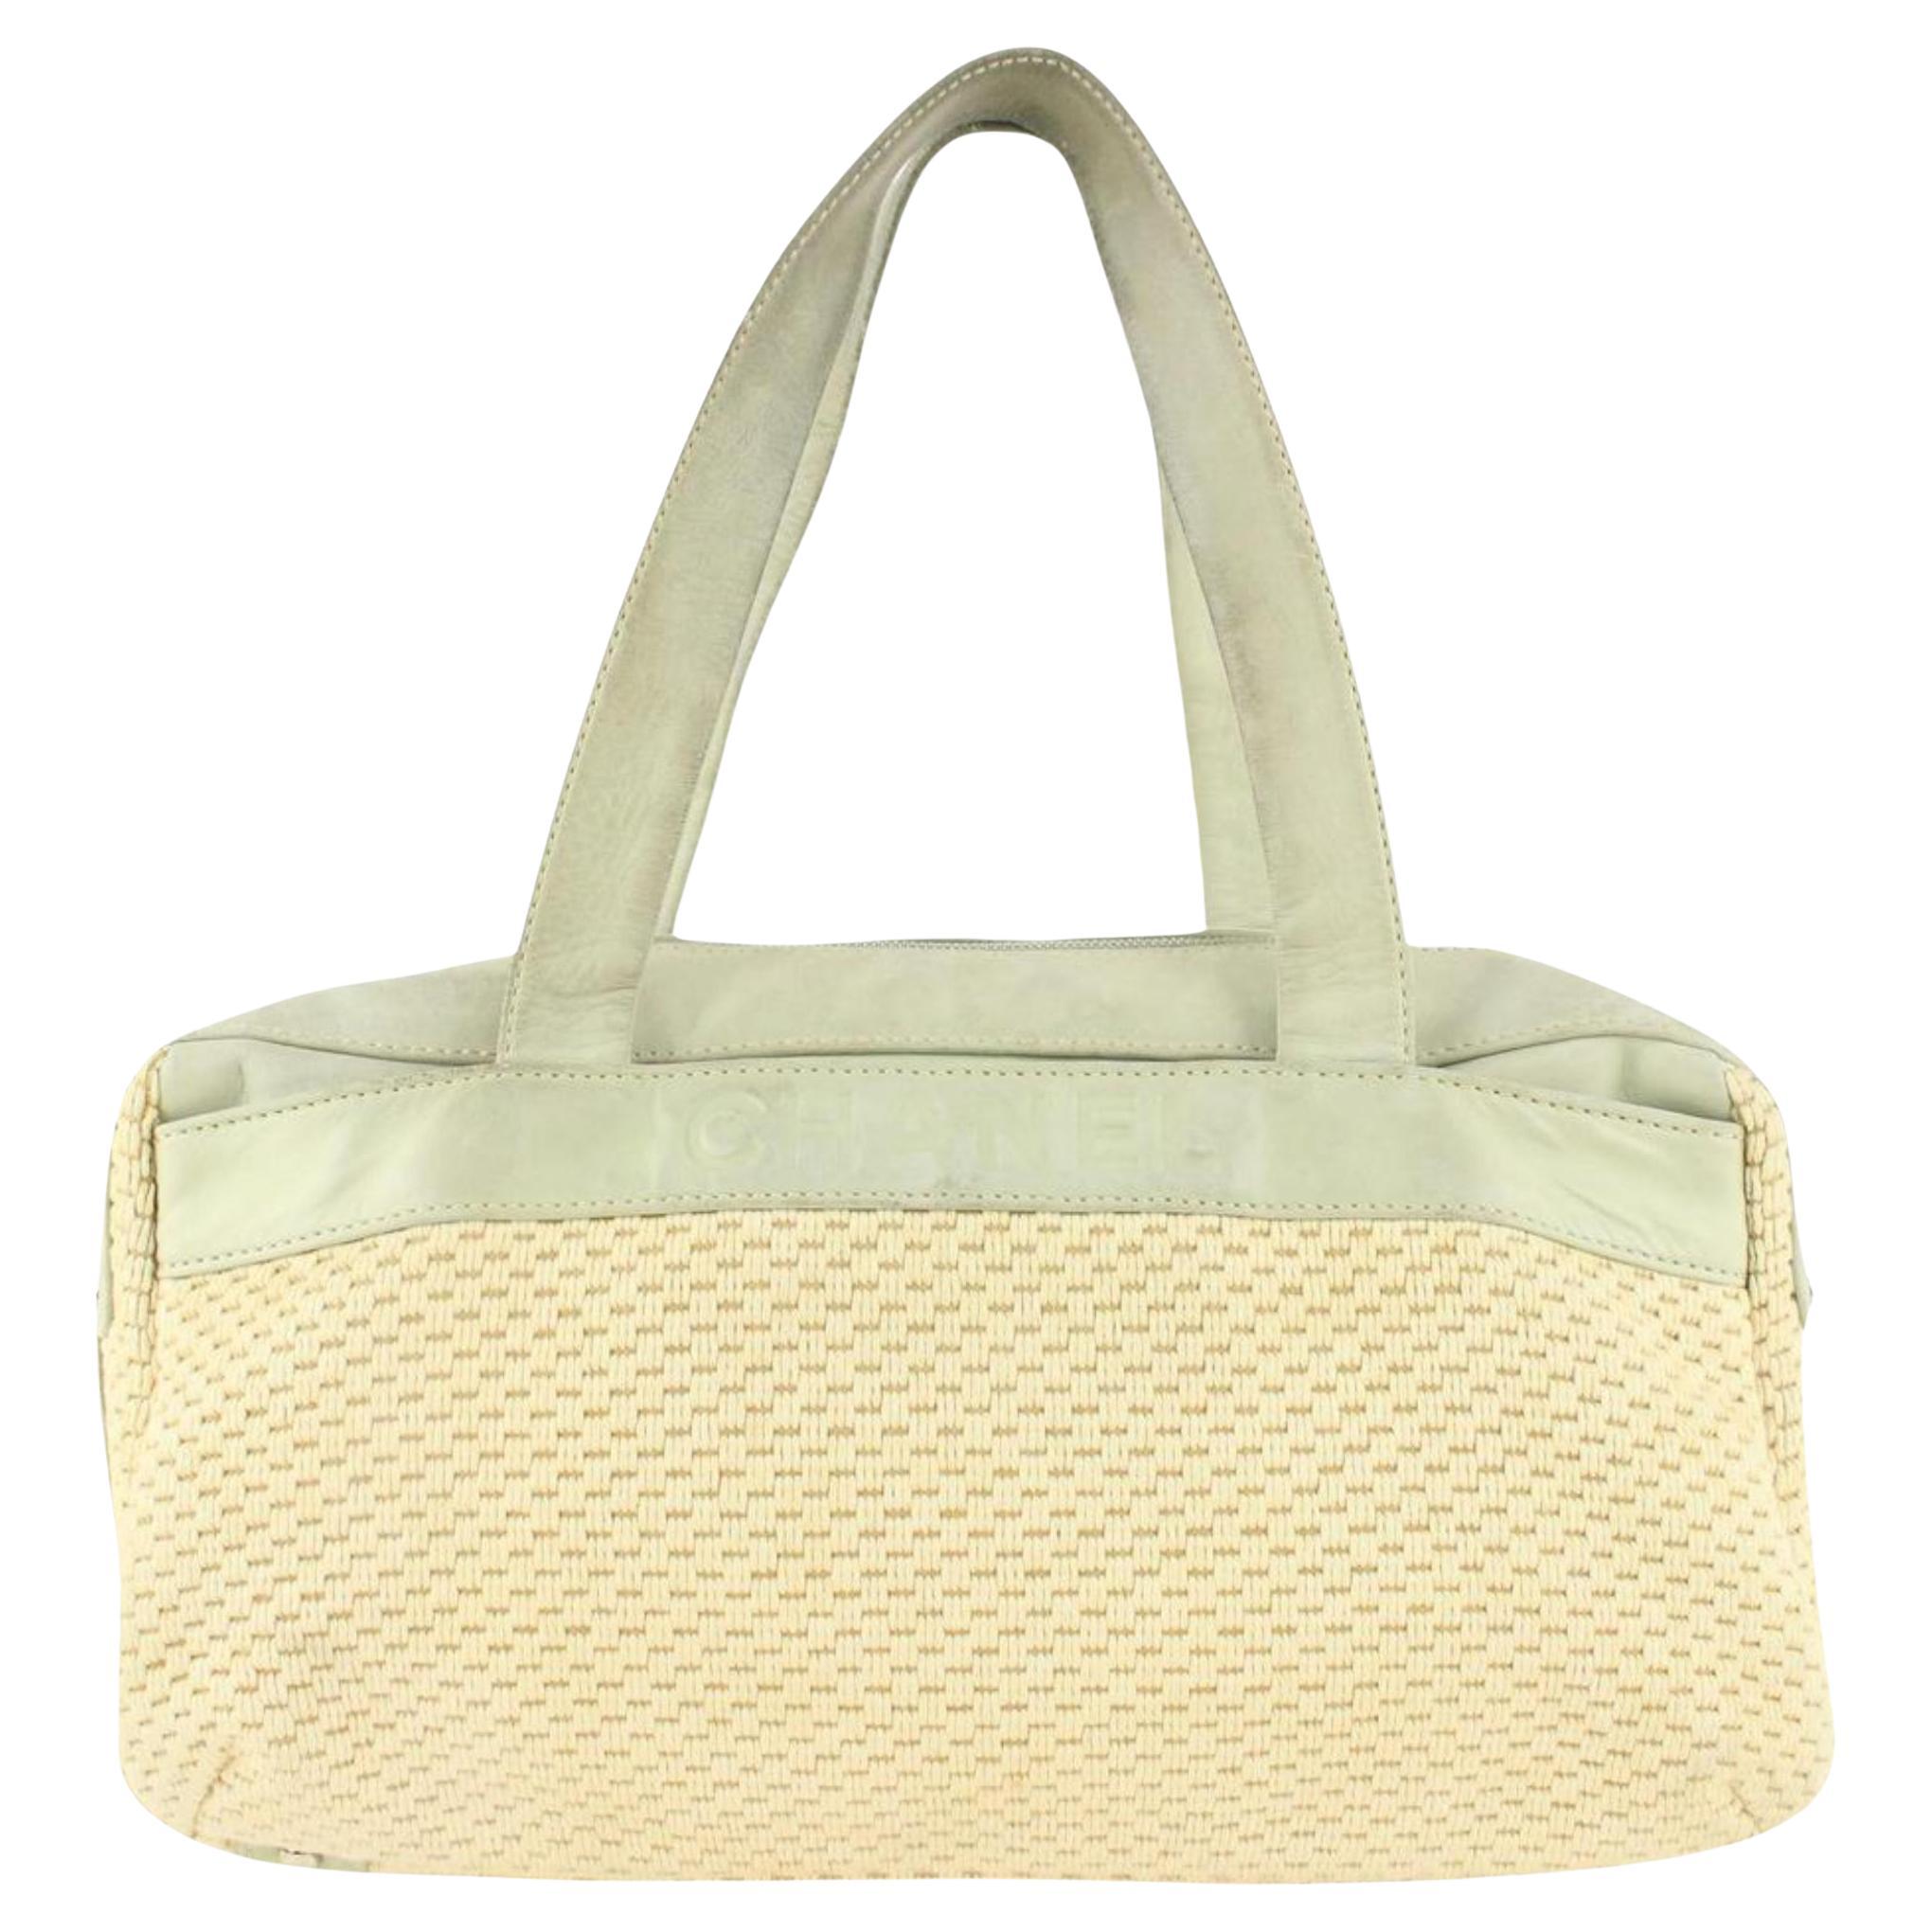 Chanel Ivory x Green Woven Fabric x Leather Boston Shoulder Bag 1115c7